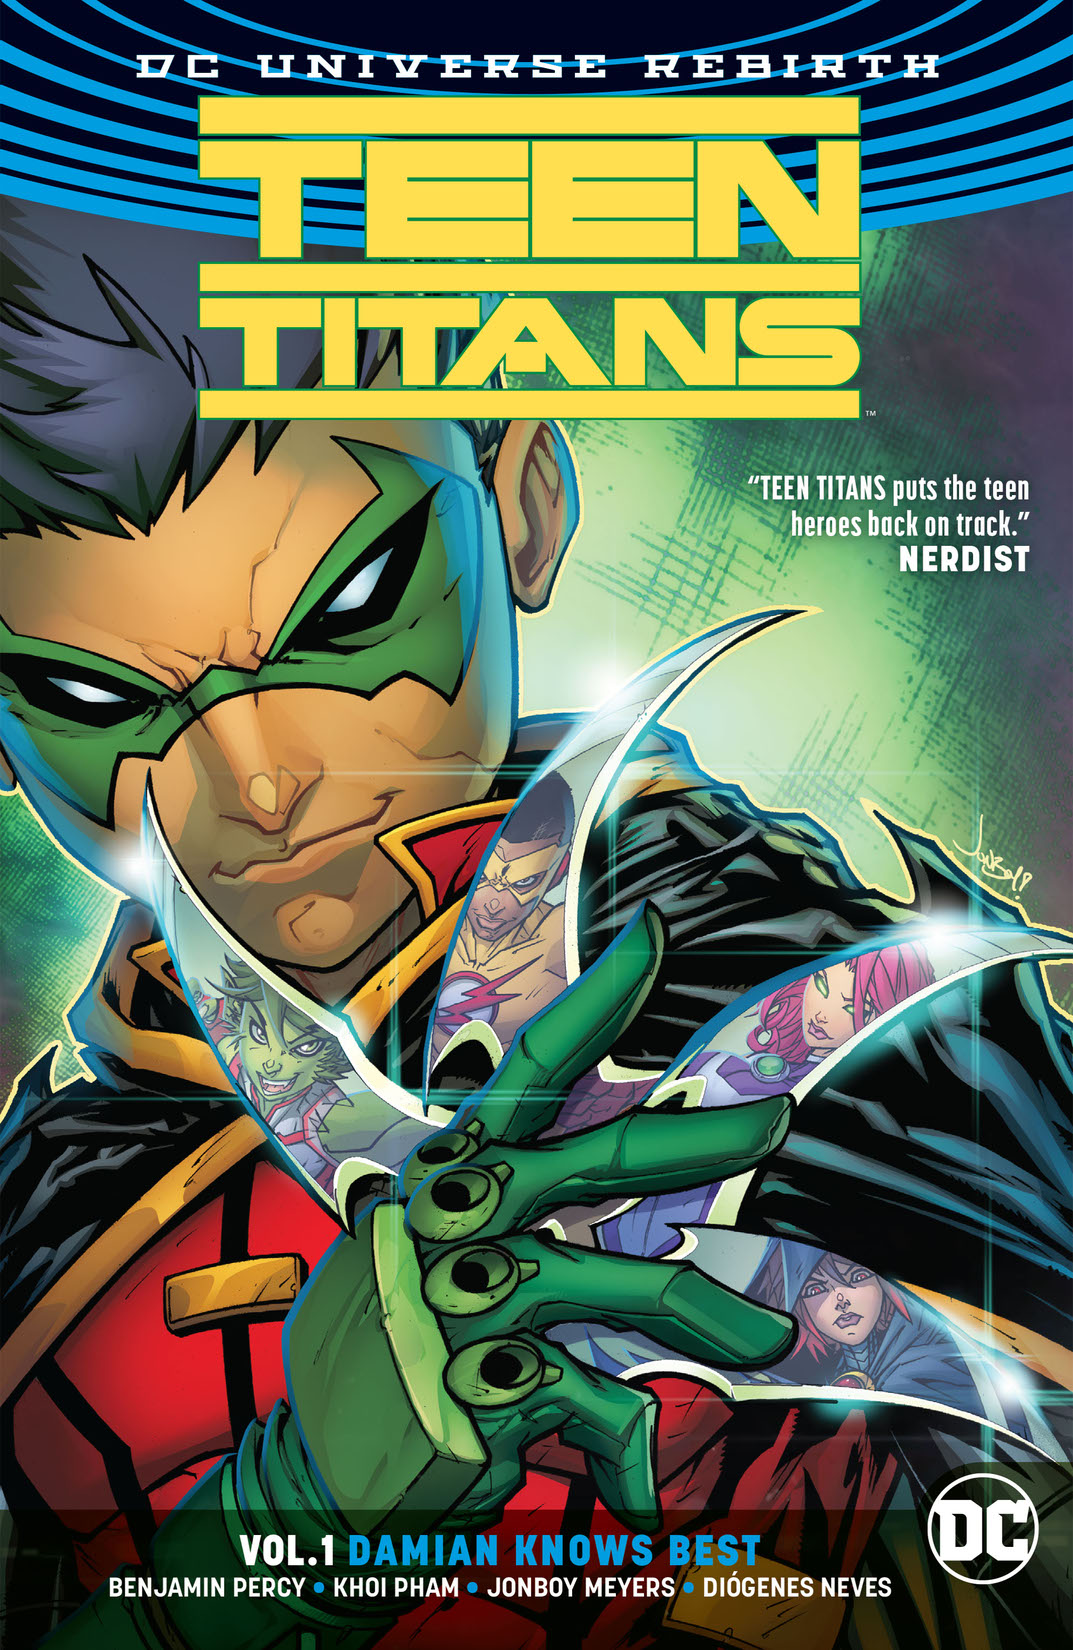 Teen Titans Vol. 1: Damian Knows Best preview images